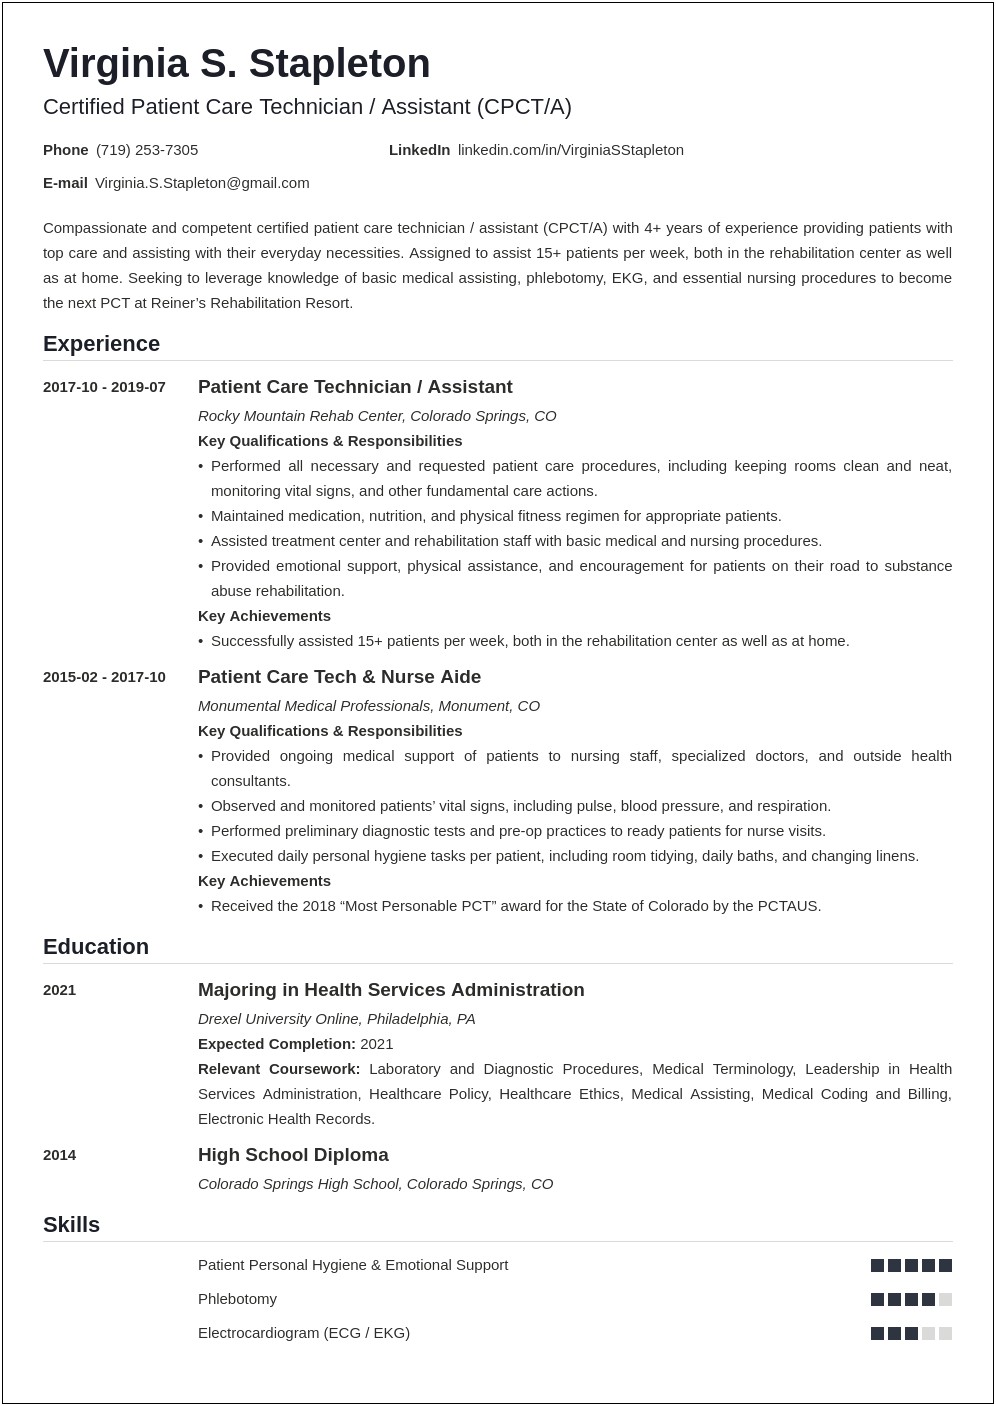 Resume Education Technician Education Or Experience First